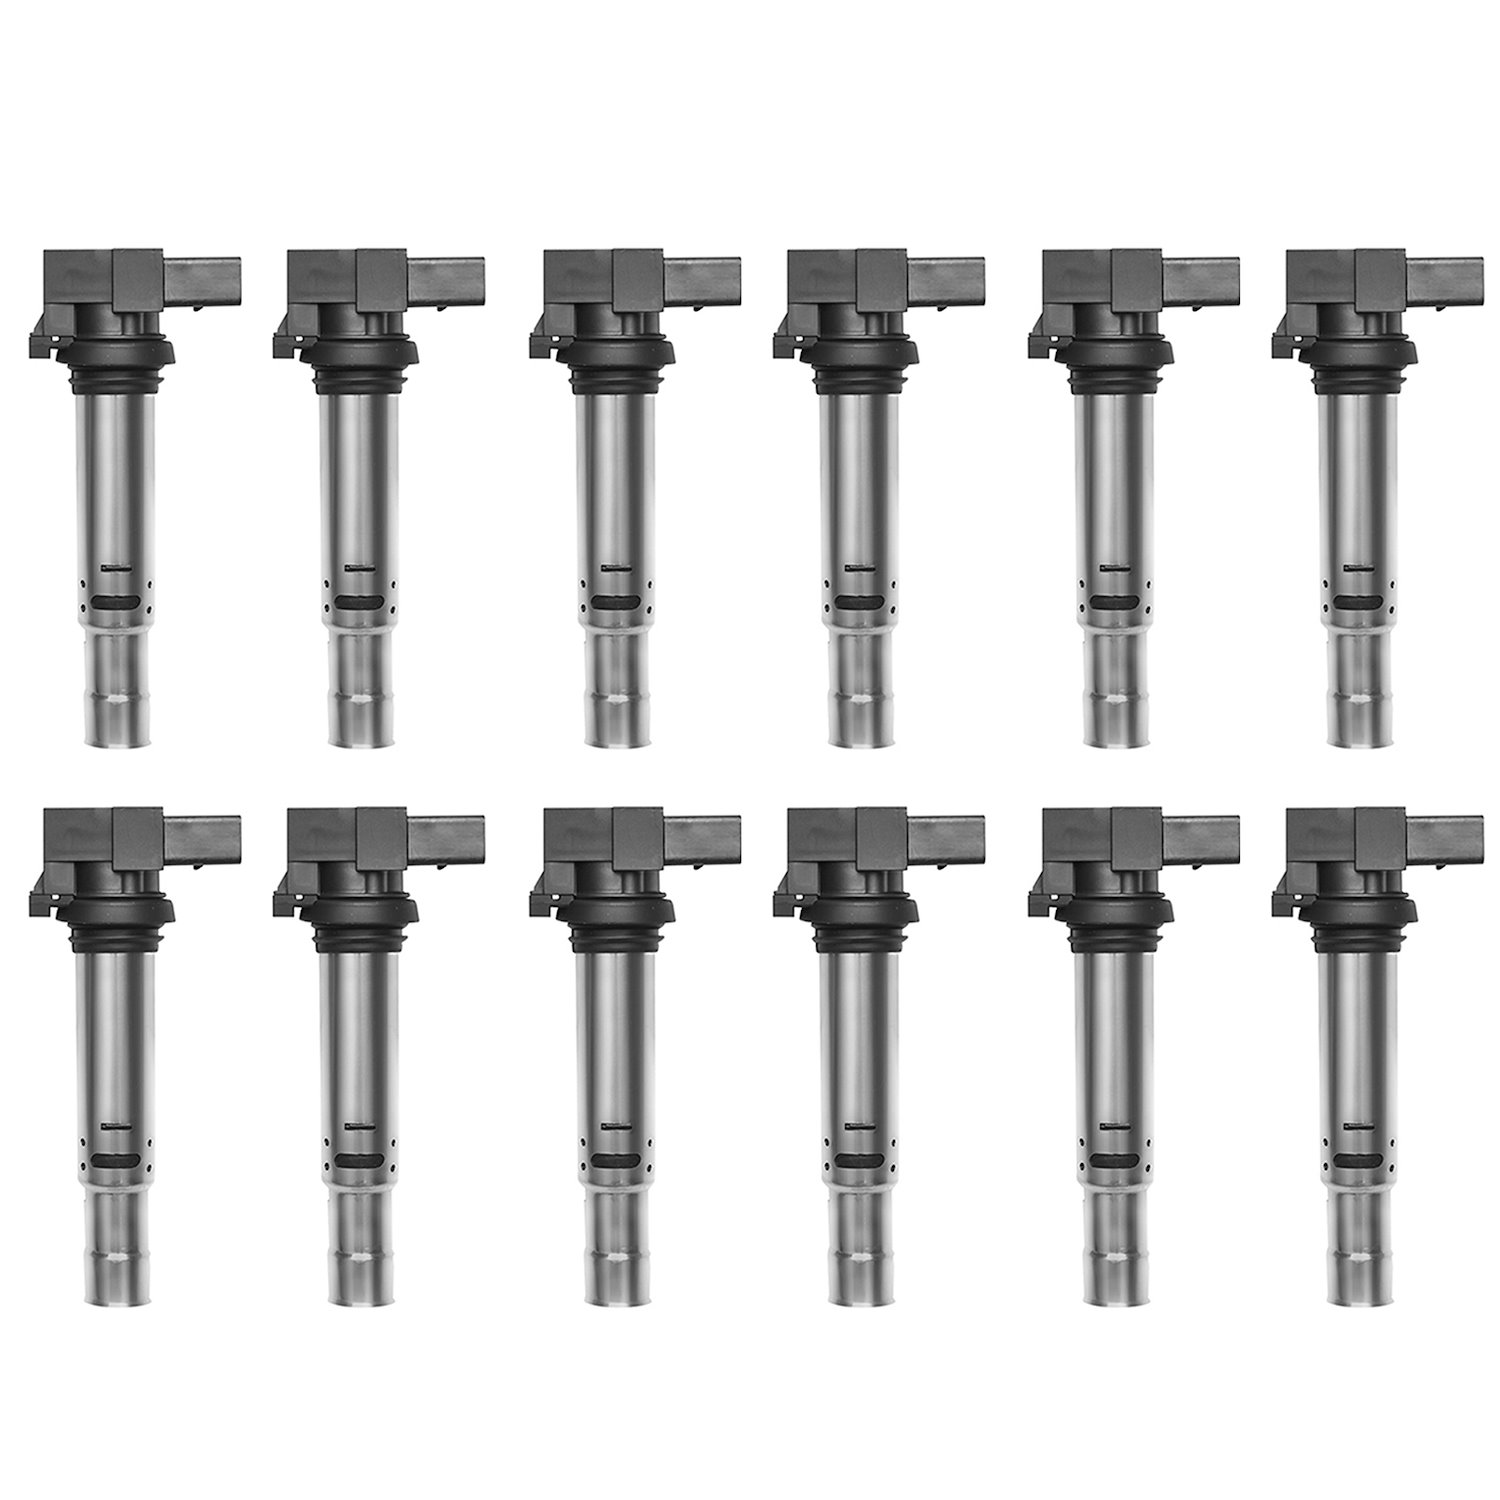 OE Replacement Ignition Coils for Volkswagen